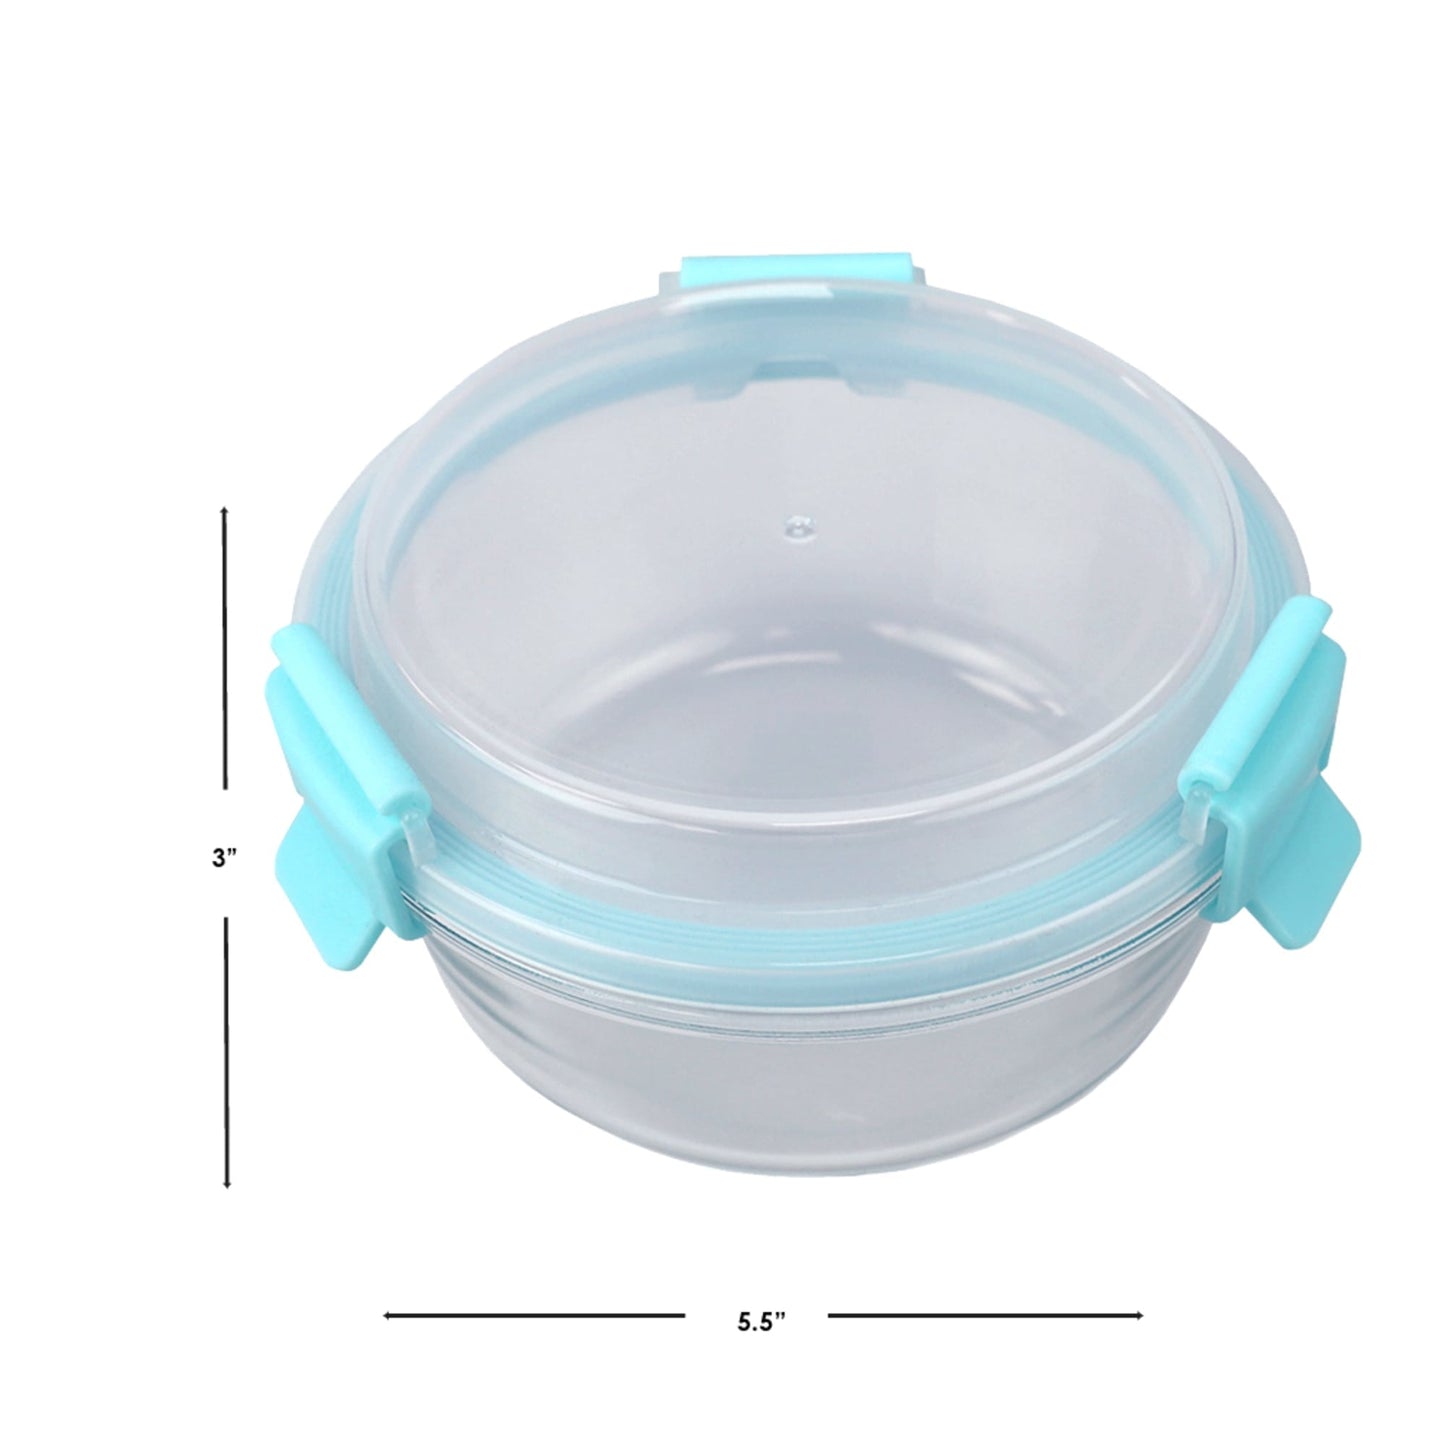 Leak Proof 13 oz.  Round Borosilicate Glass Food Storage Container with Air-tight Plastic Lid, Turquoise